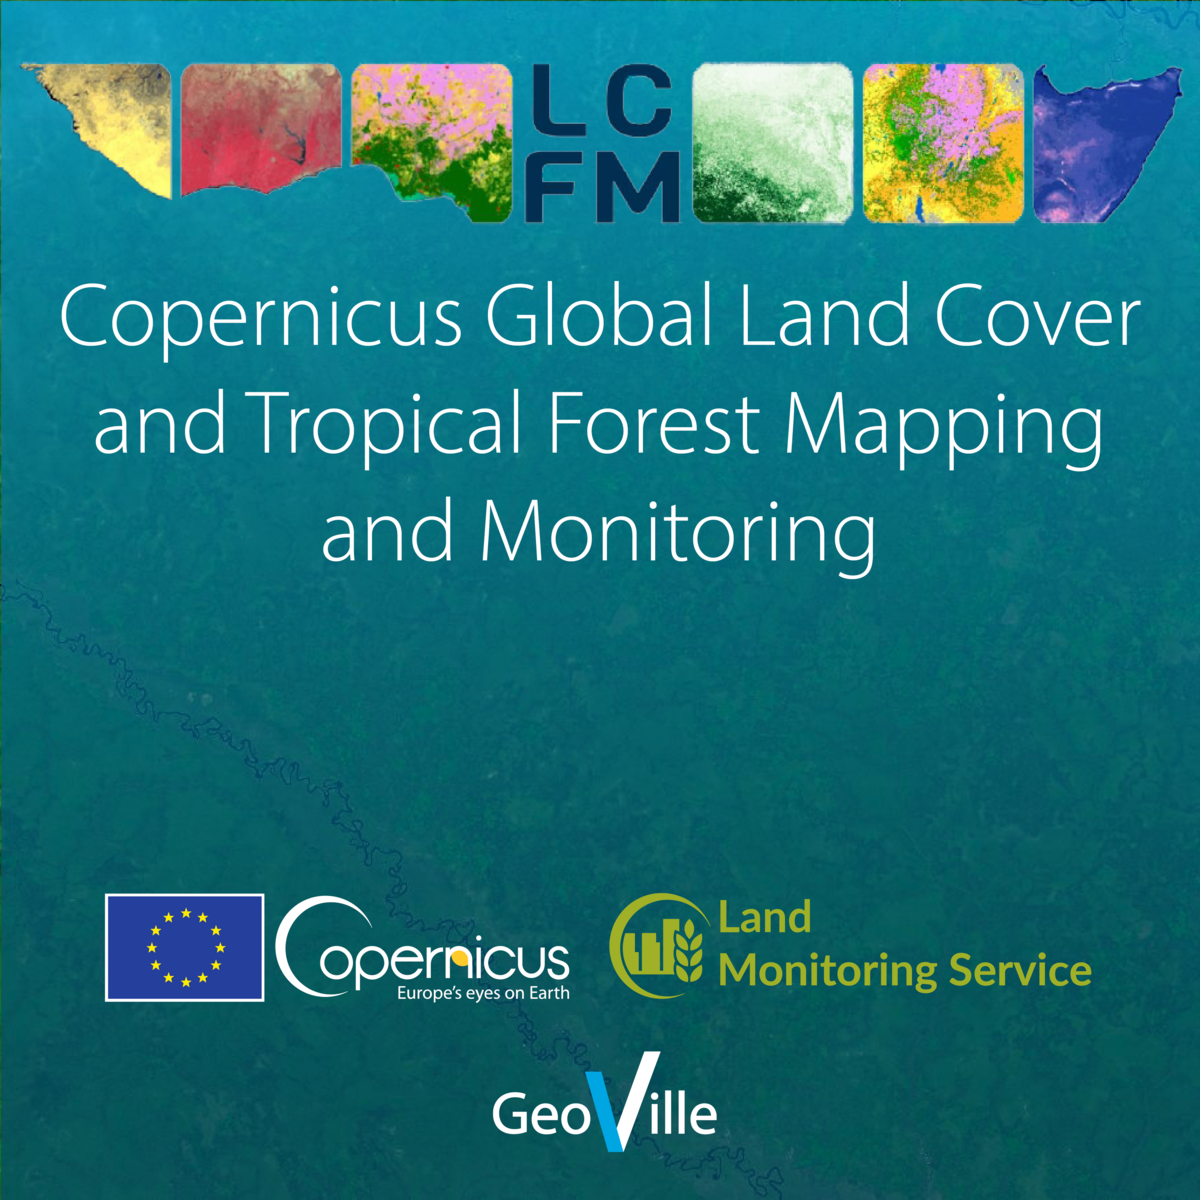 Copernicus Global Land Cover and Tropical Forest Mapping and Monitoring